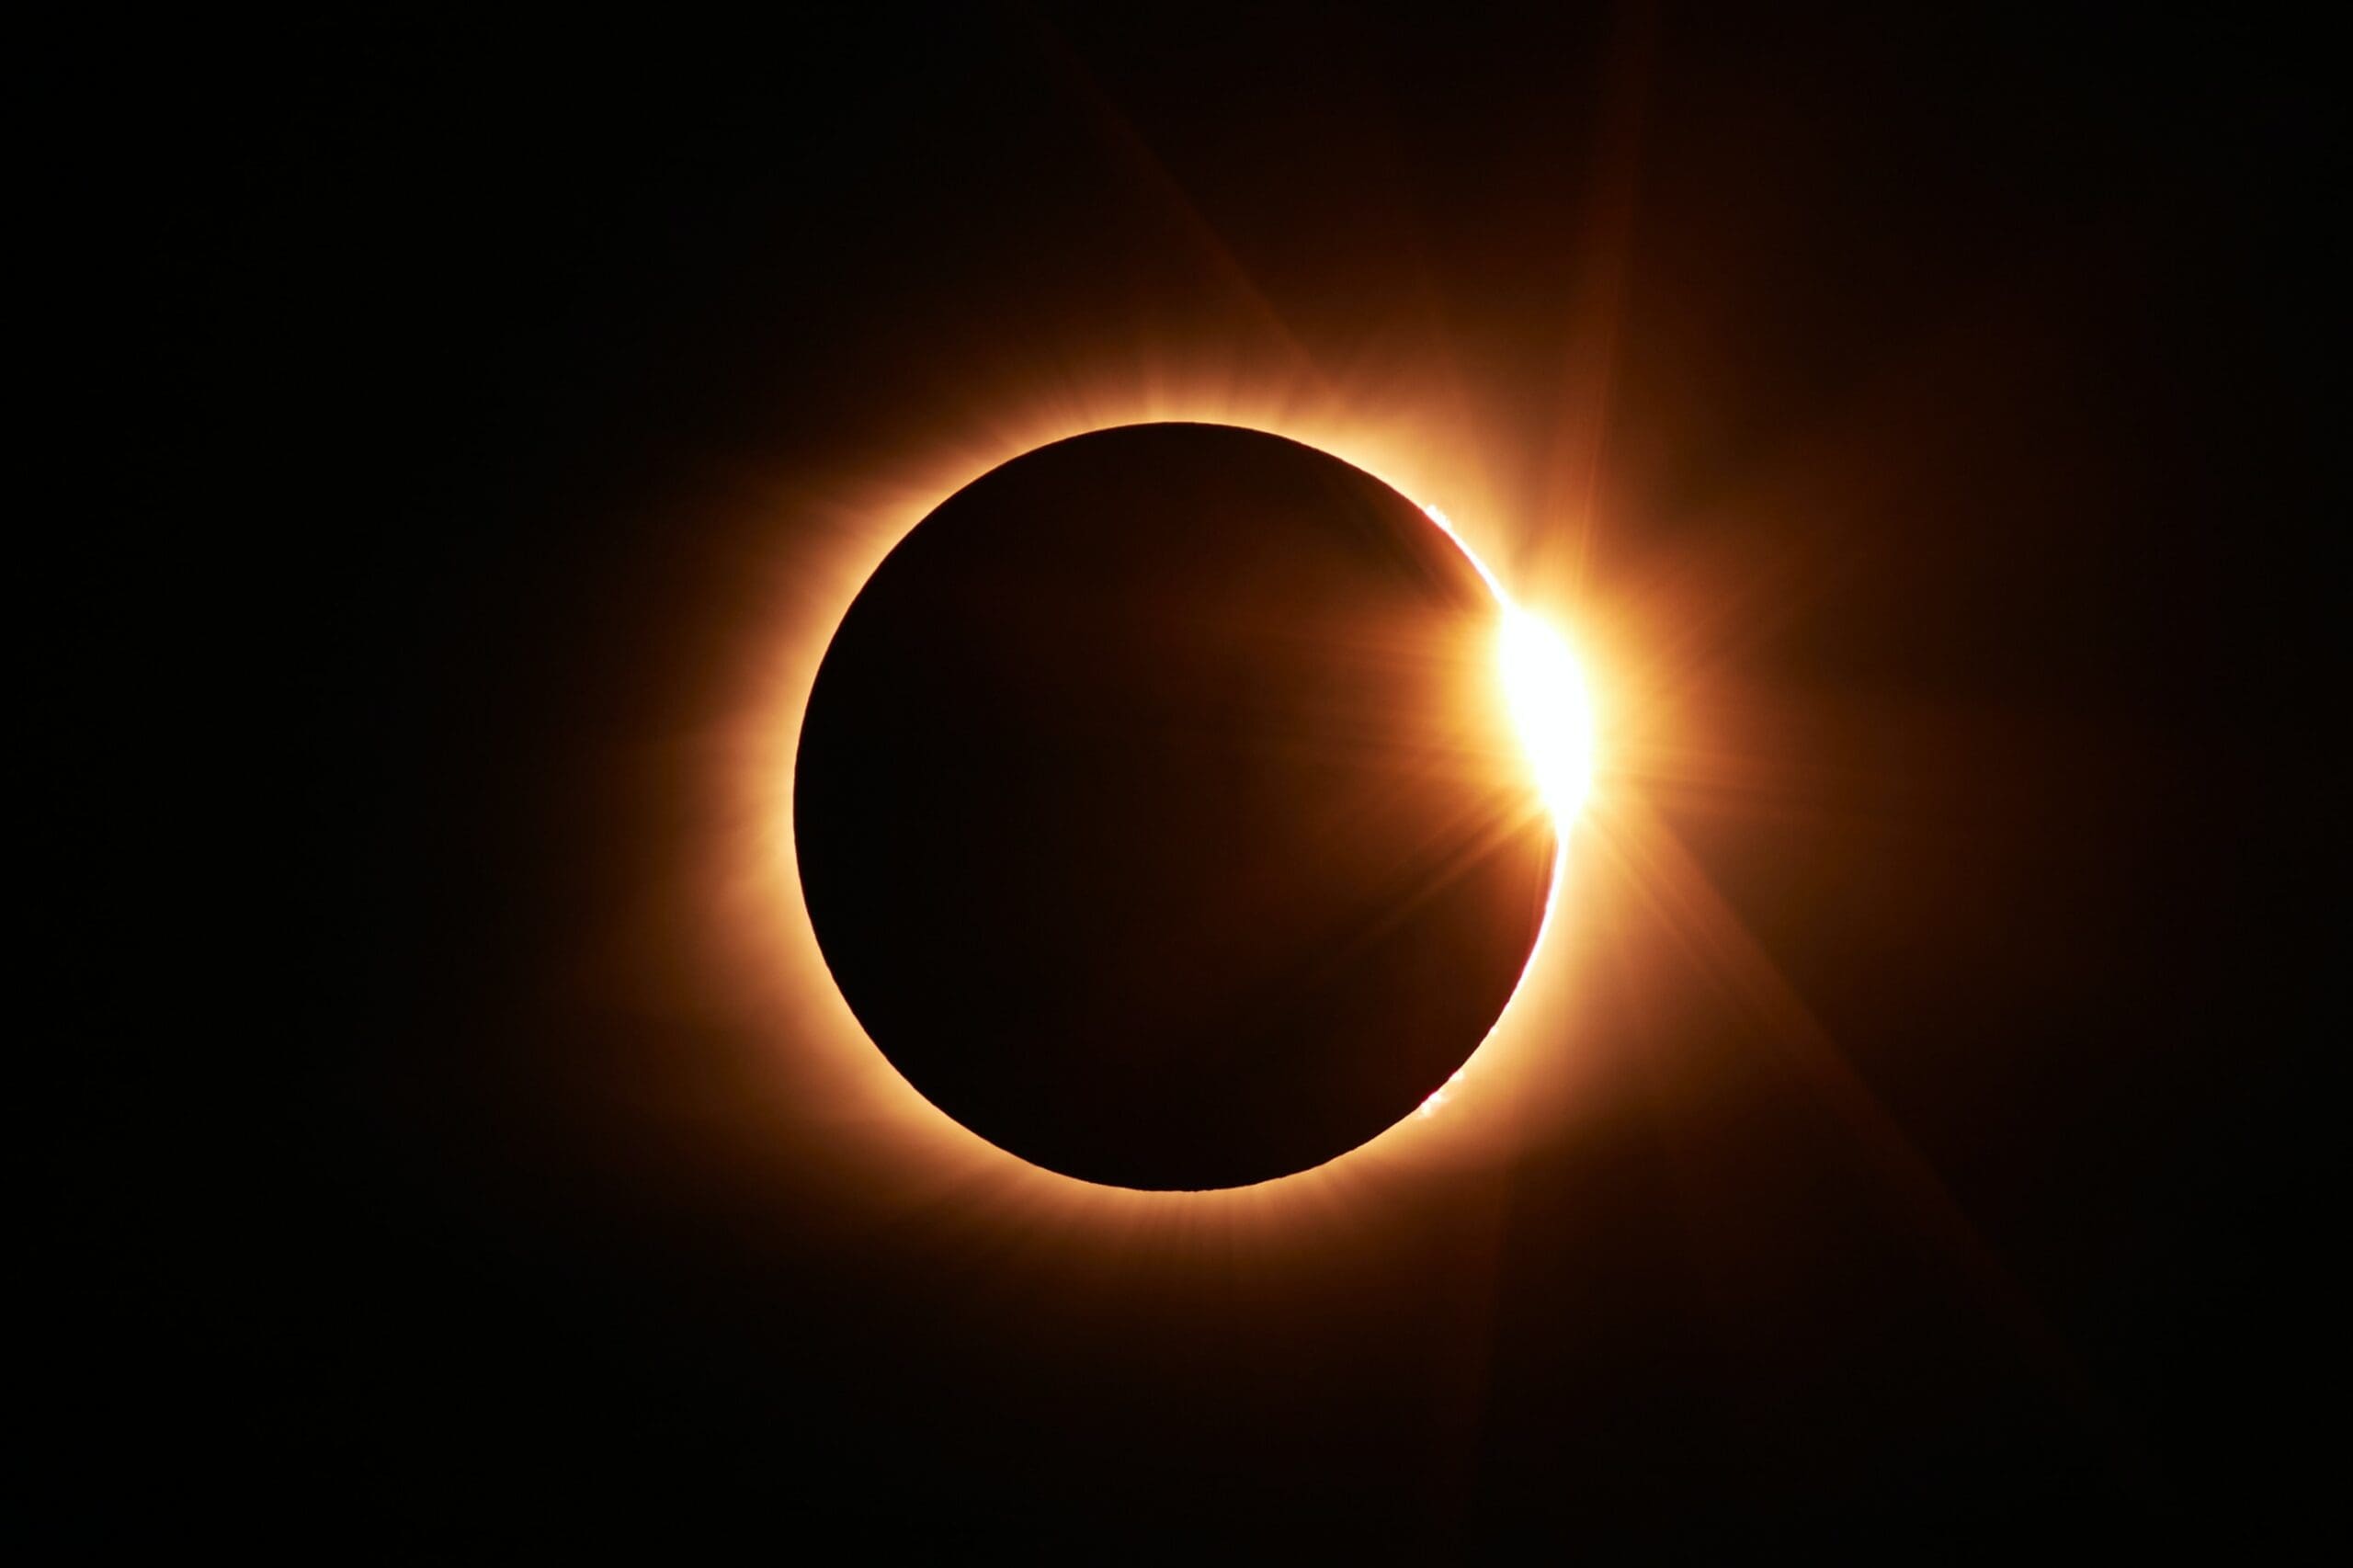 The 'Ring of Fire' eclipse will occur Saturday.